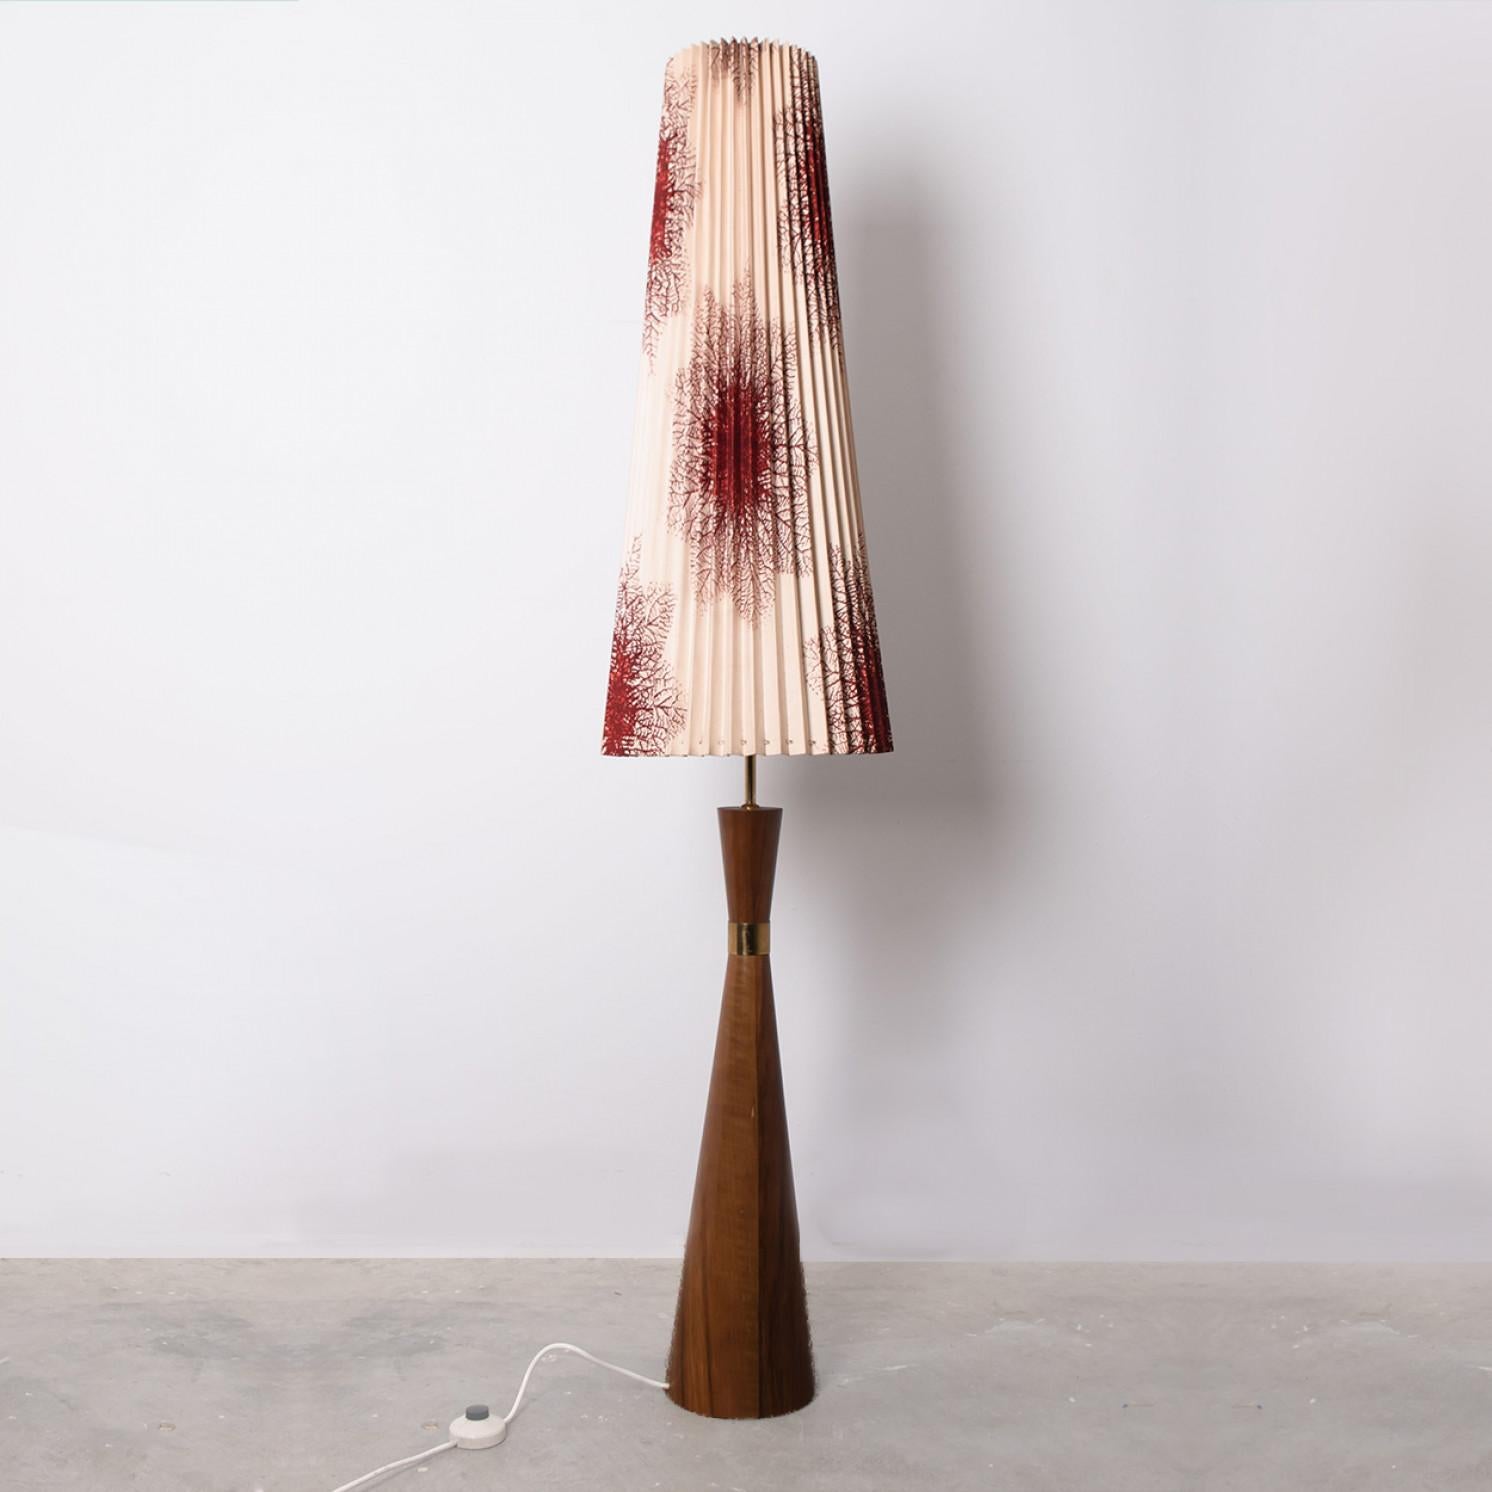 Beautiful floor lamp by Knoll, manufactured circa 1970. Red and beige shade with beautiful patterns, illuminates beautifully. The base is made of wood with a classy ring in the middle, giving it a formal and exciting look. A real statement